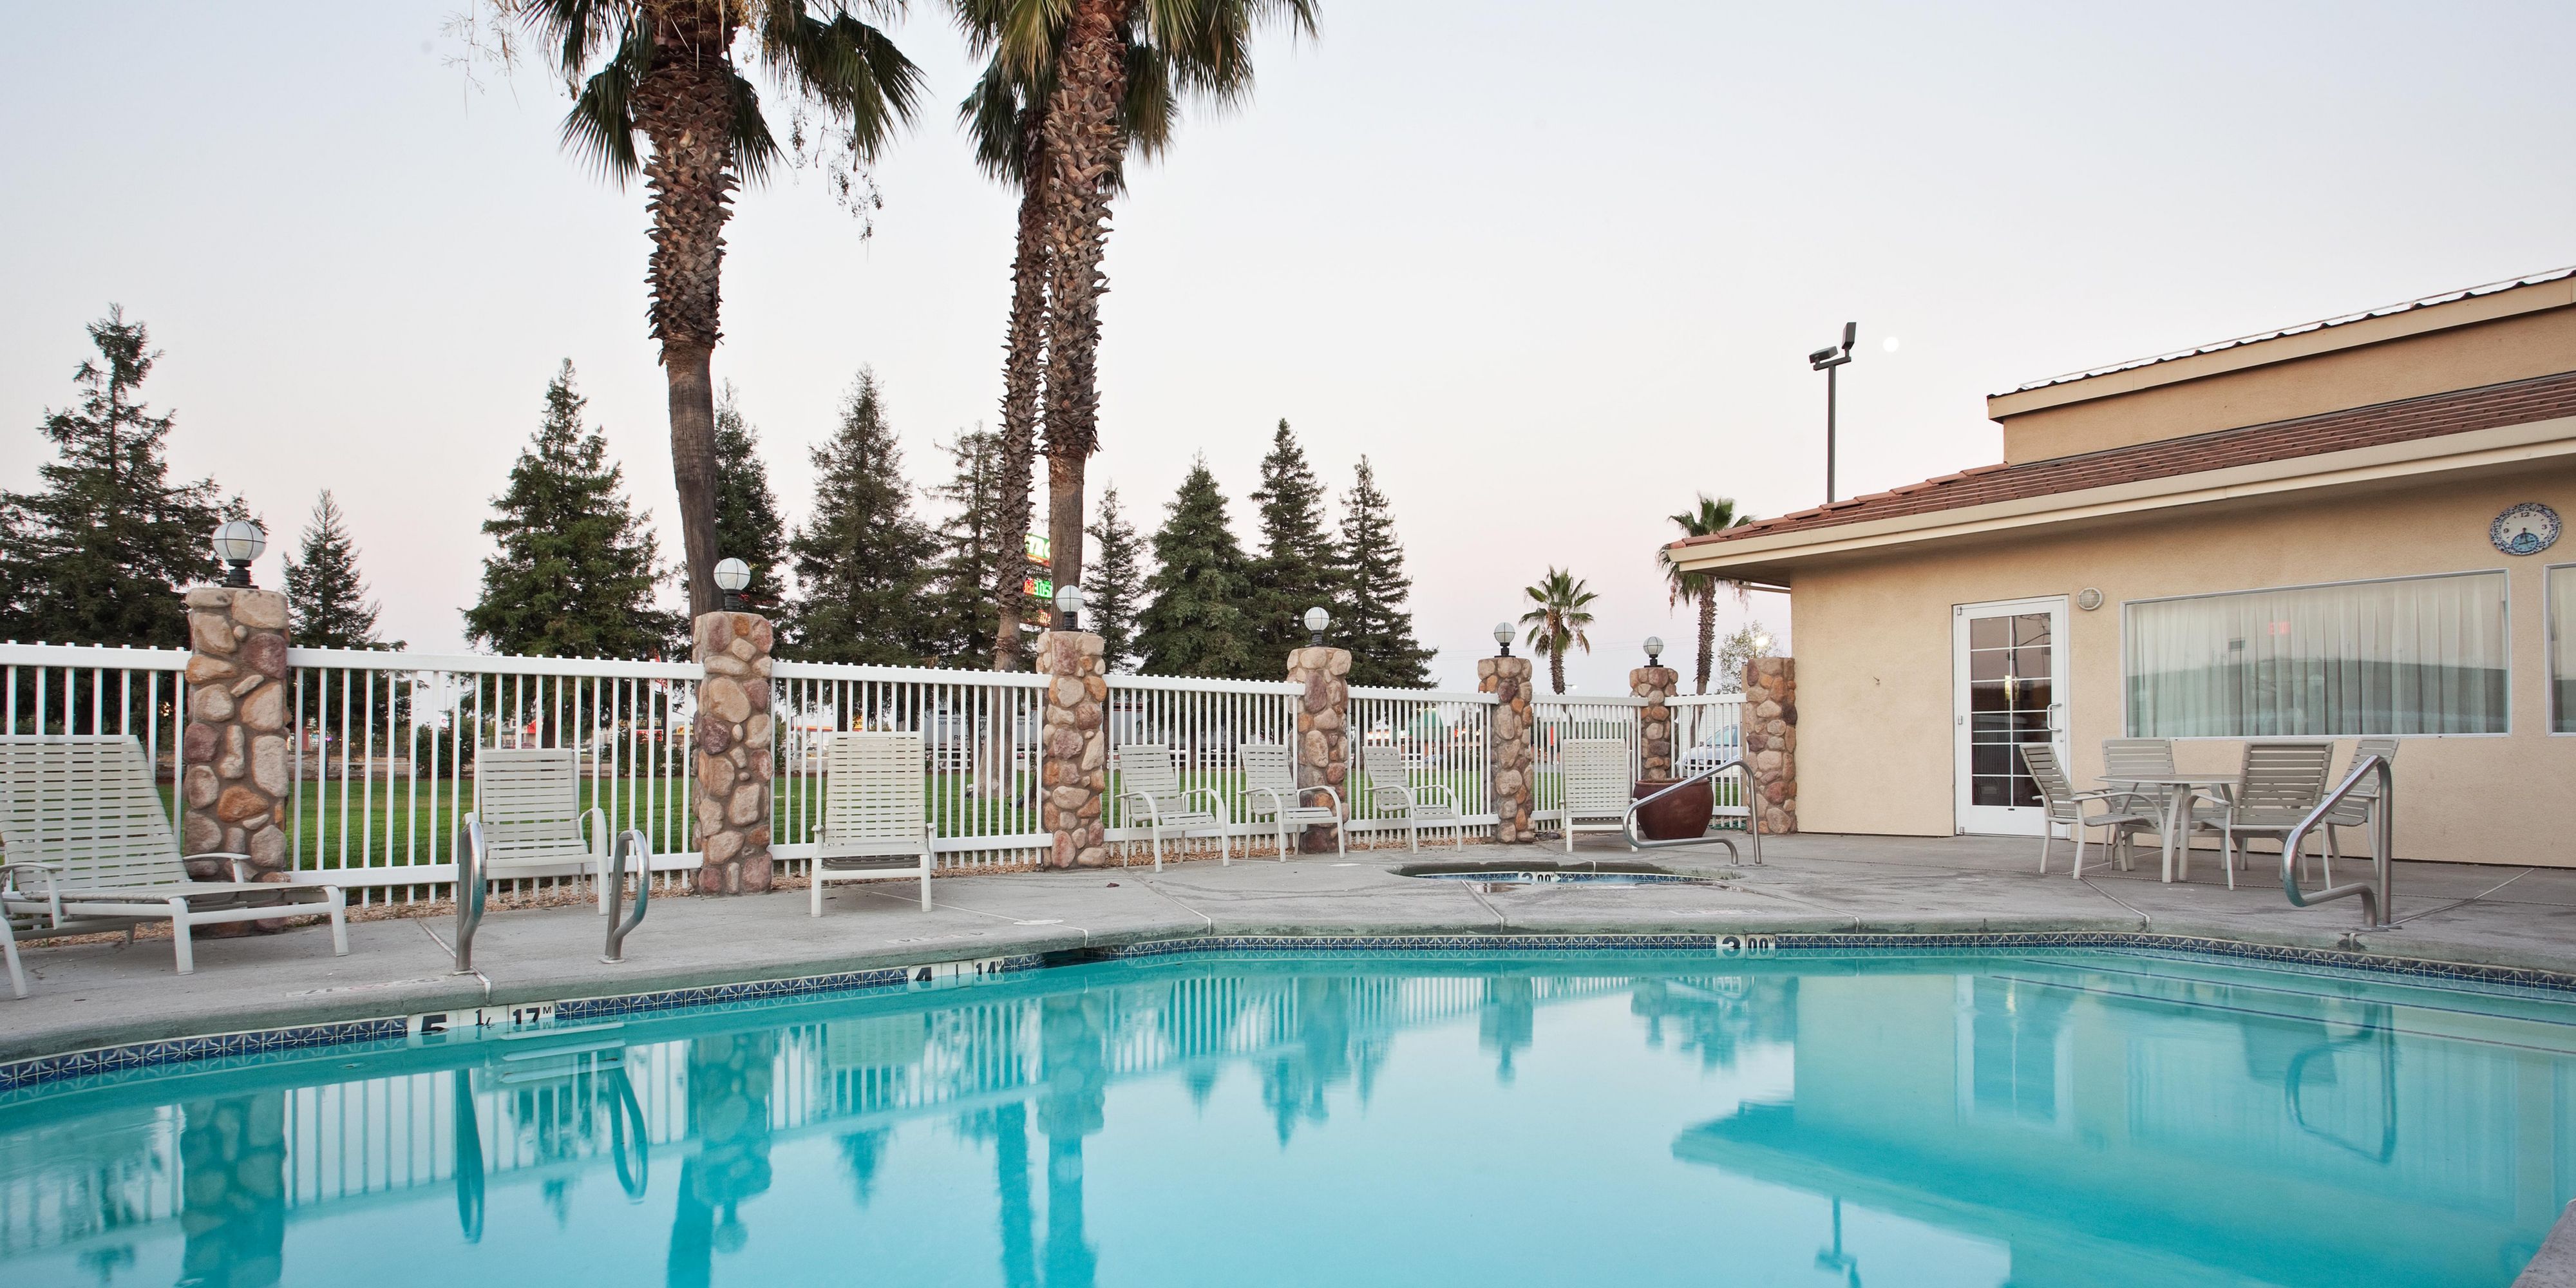 Take a dip in our heated outdoor pool - Open year round!